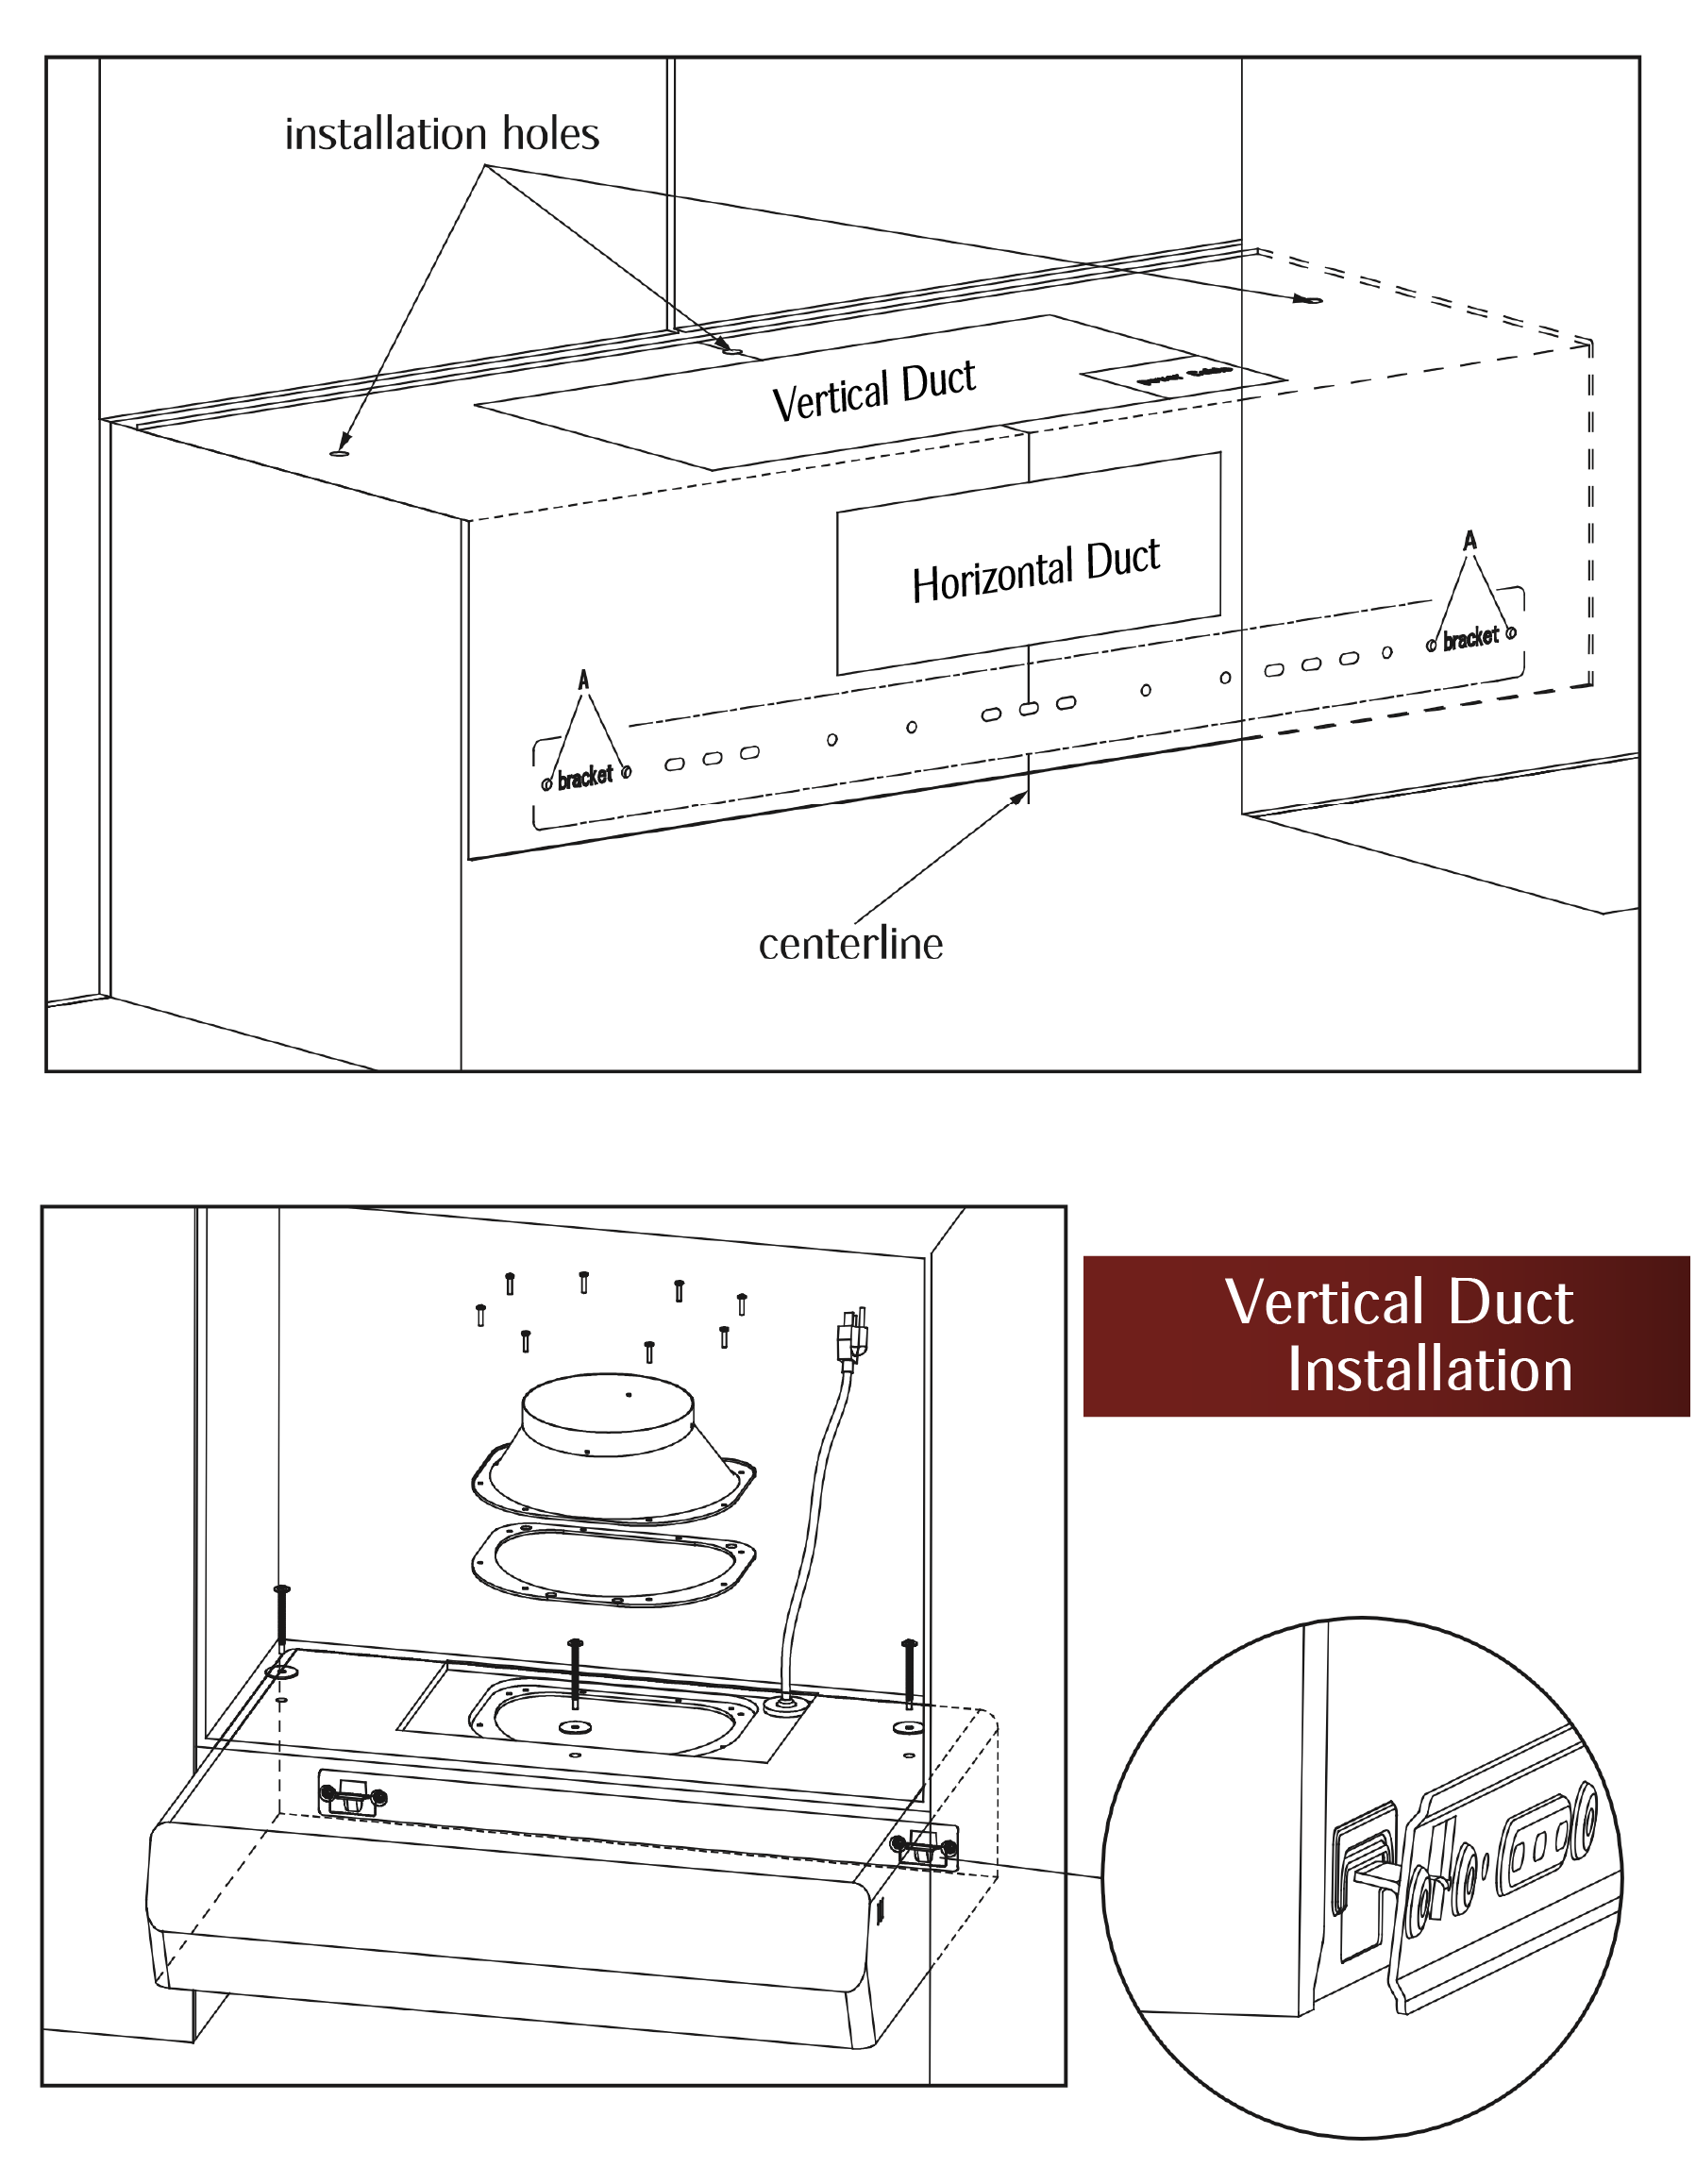 Vertical duct installation diagram for Pixie Air range hood